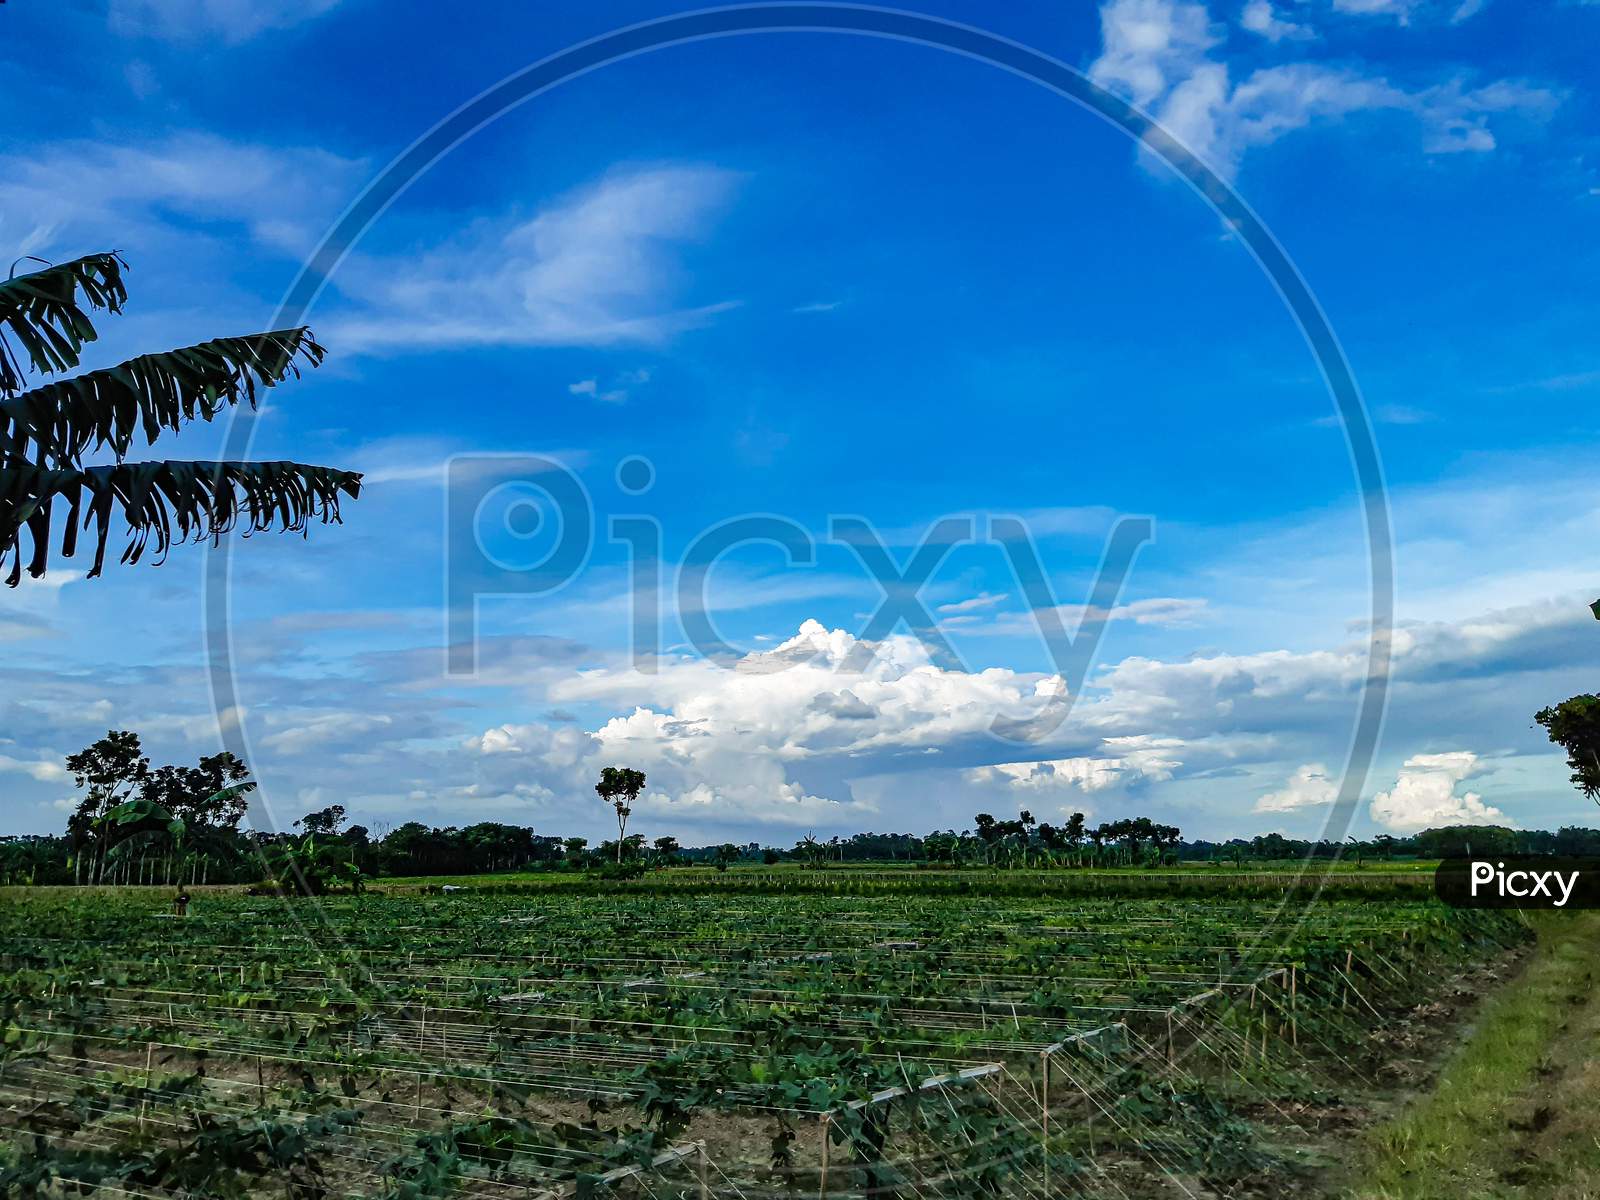 Green Farmland And White Clouds In The Blue Sky. This Is A Picture Of The Time Of Sunset.